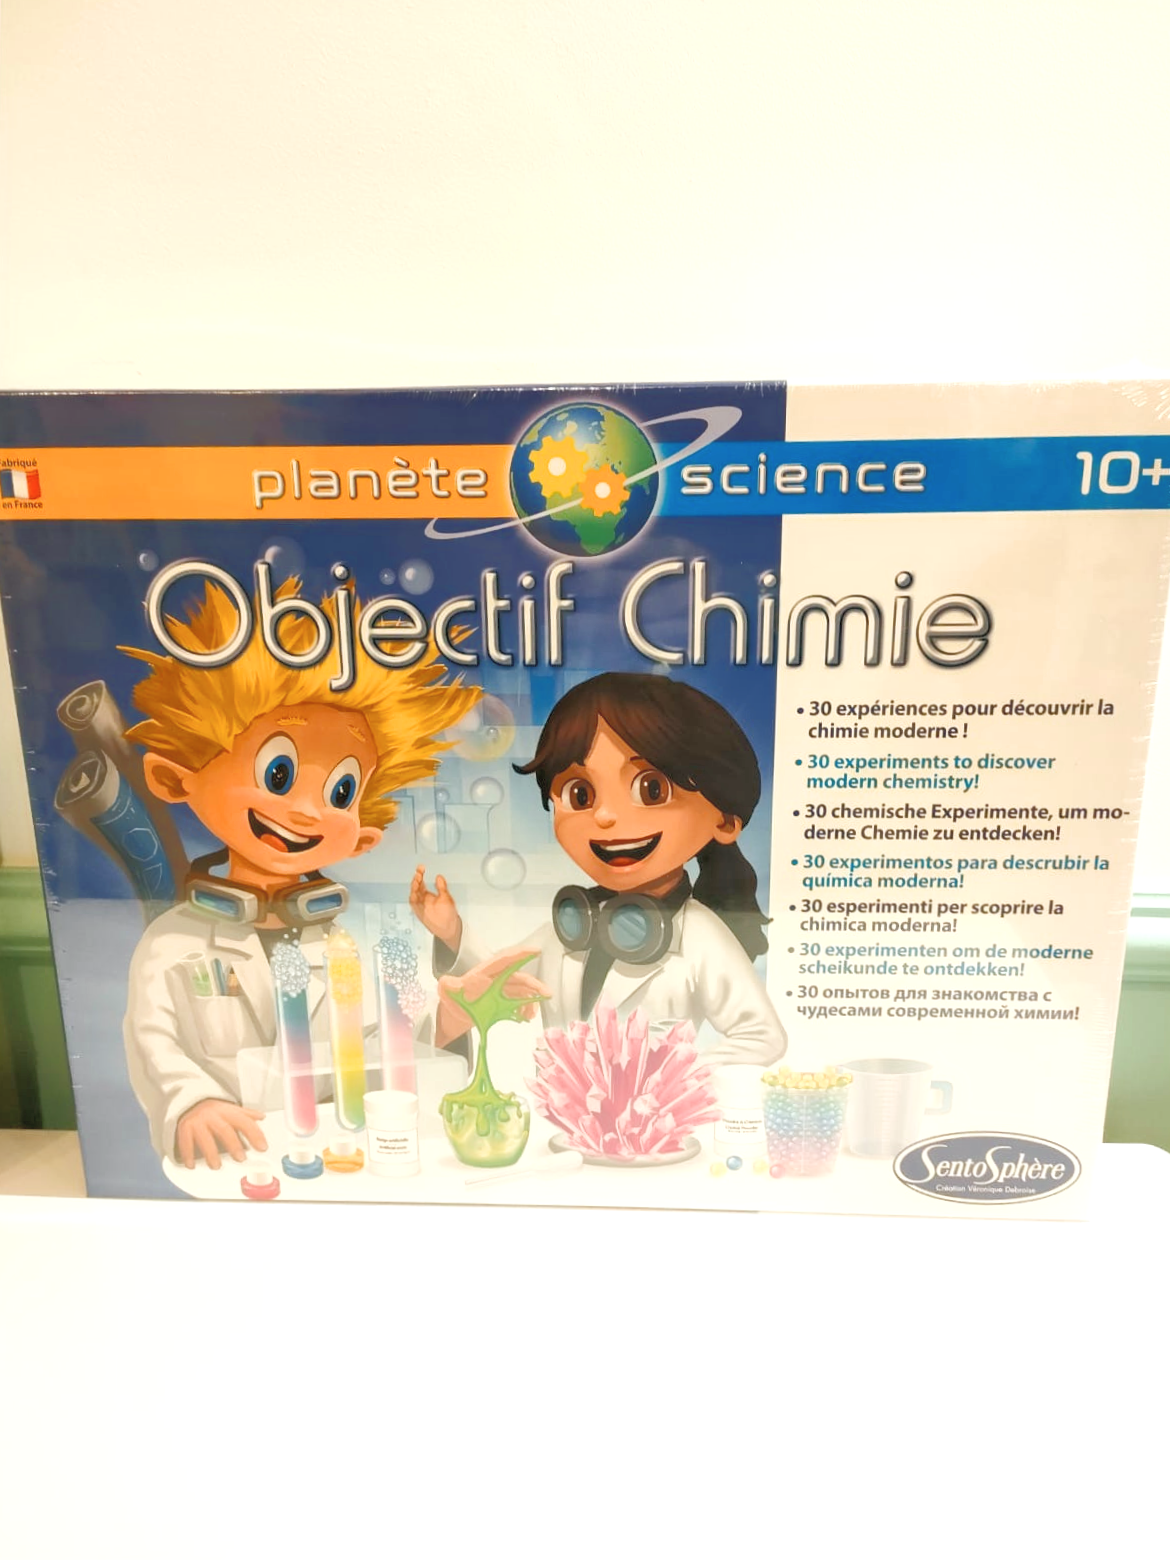 Objectif Chimie - Sentosphère - Made in France